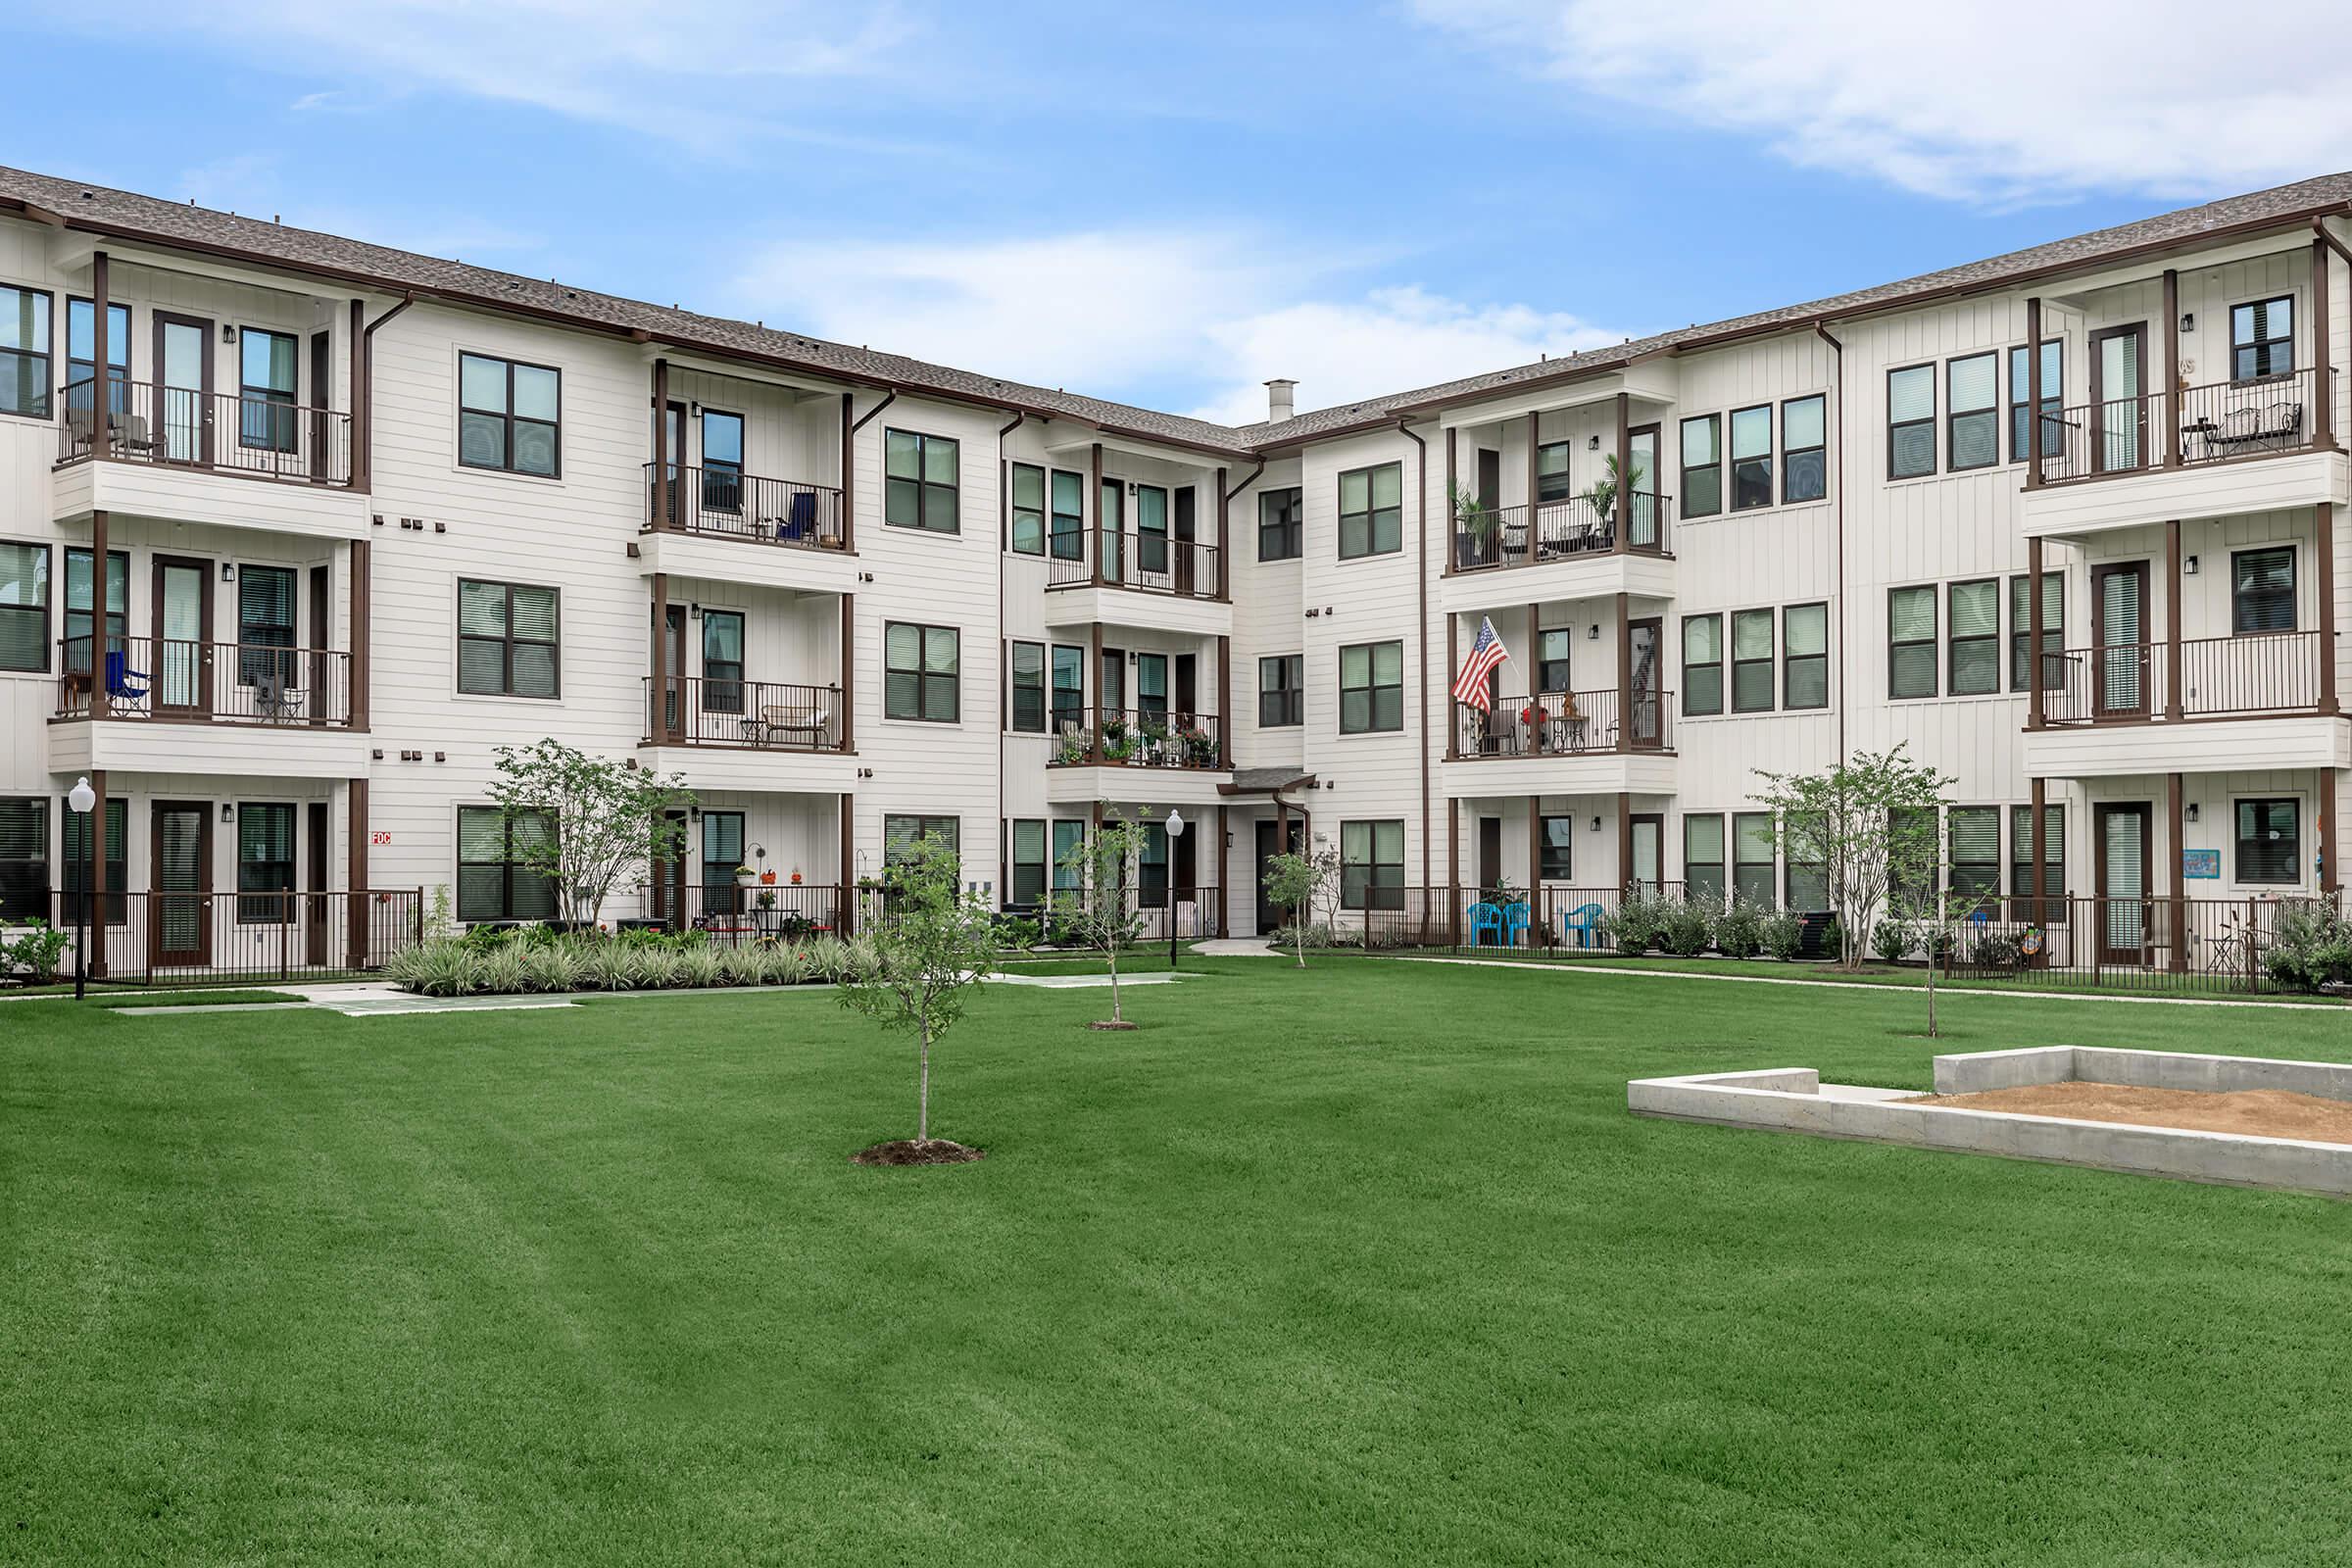 APARTMENTS FOR RENT IN SPRING, TEXAS